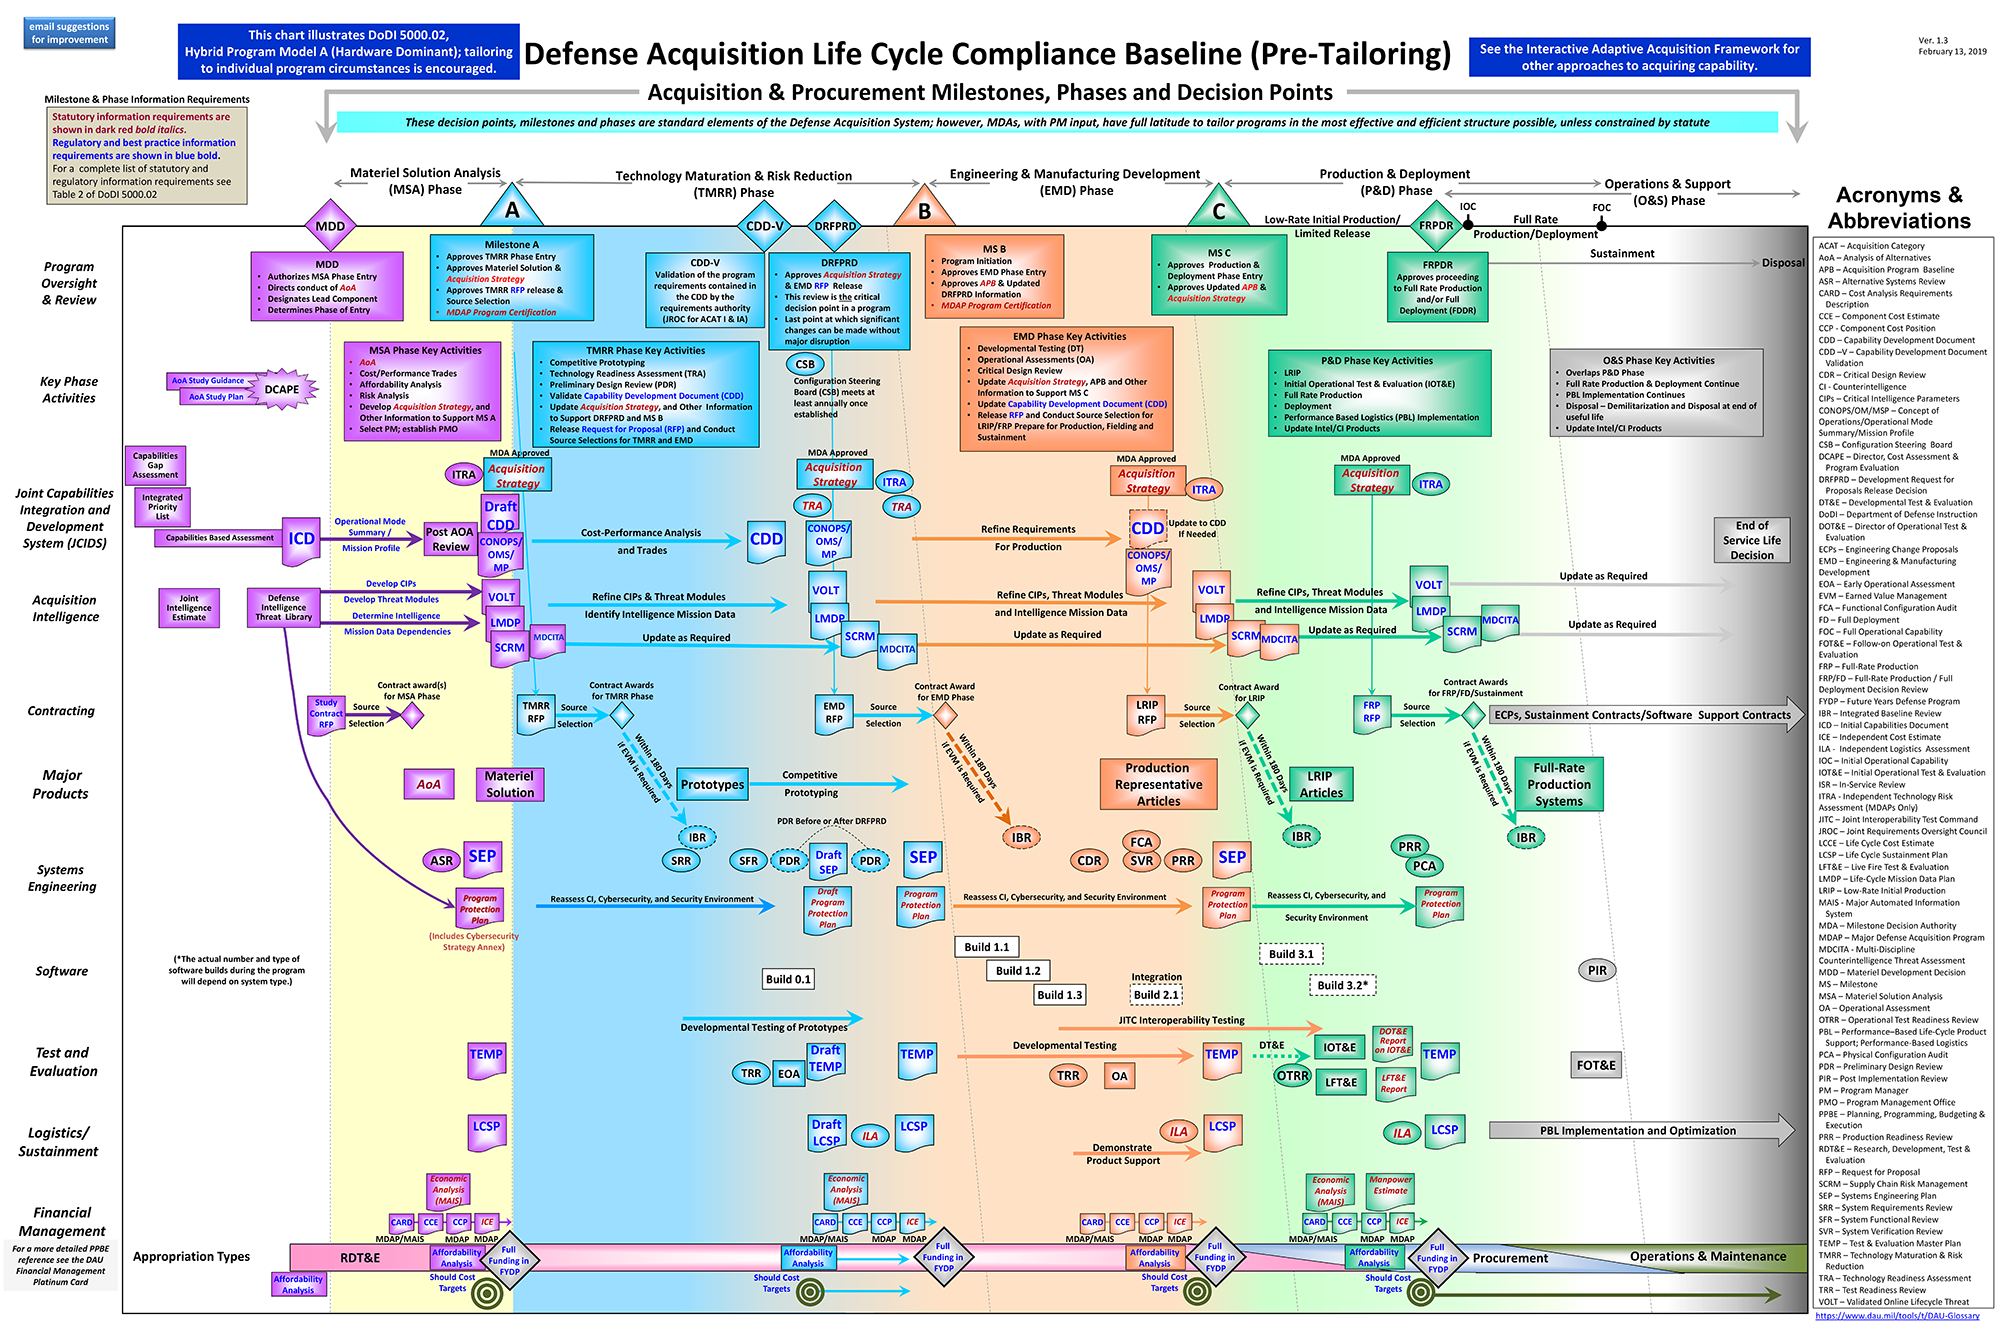 The Defense Acquisition Life Cycle Compliance Baseline